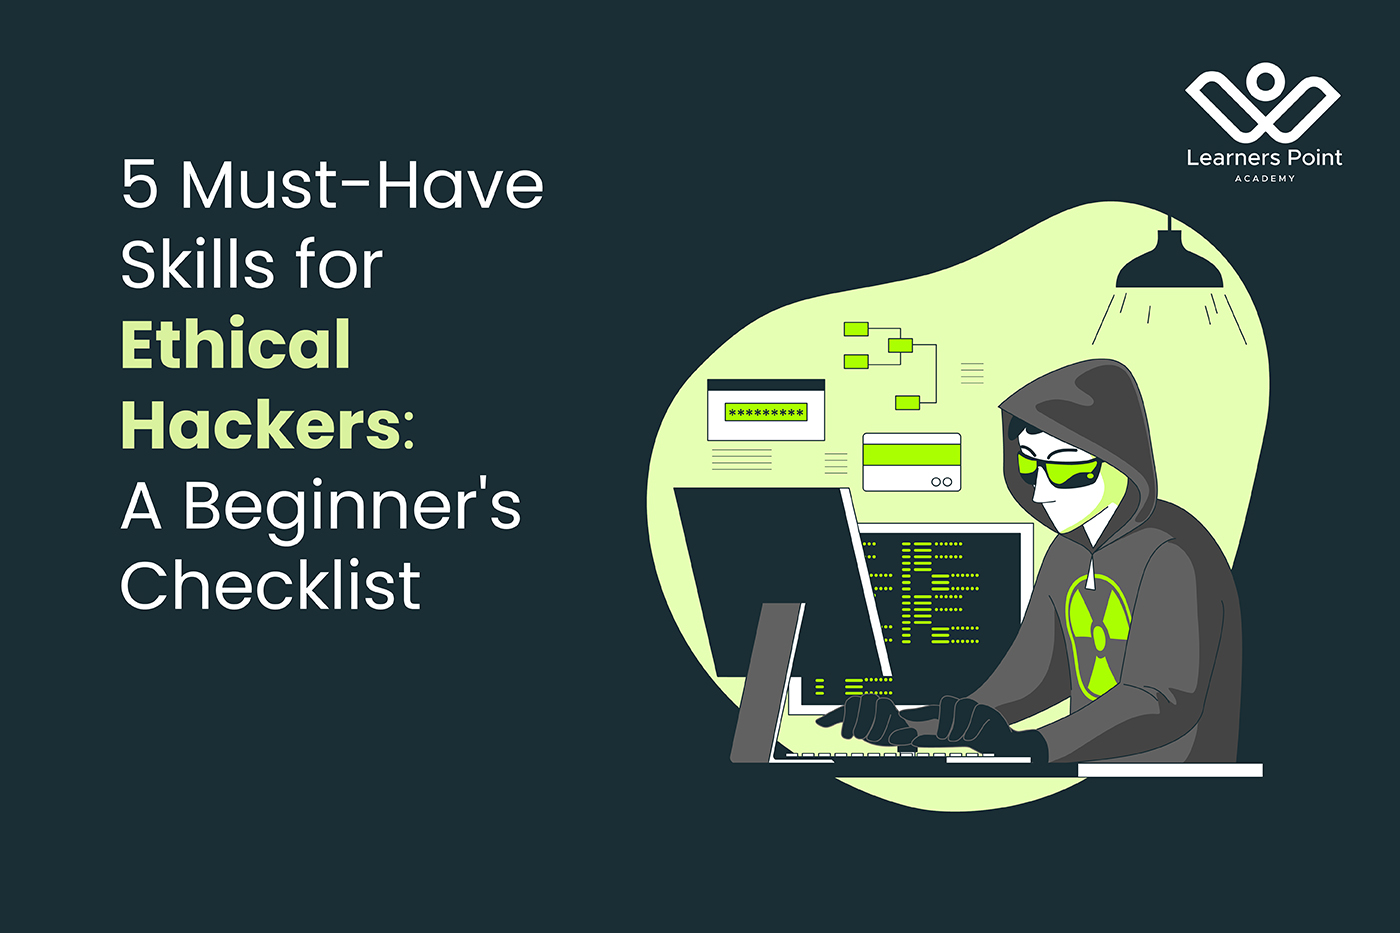 5 Must-Have Skills for Ethical Hackers: A Beginner's Checklist